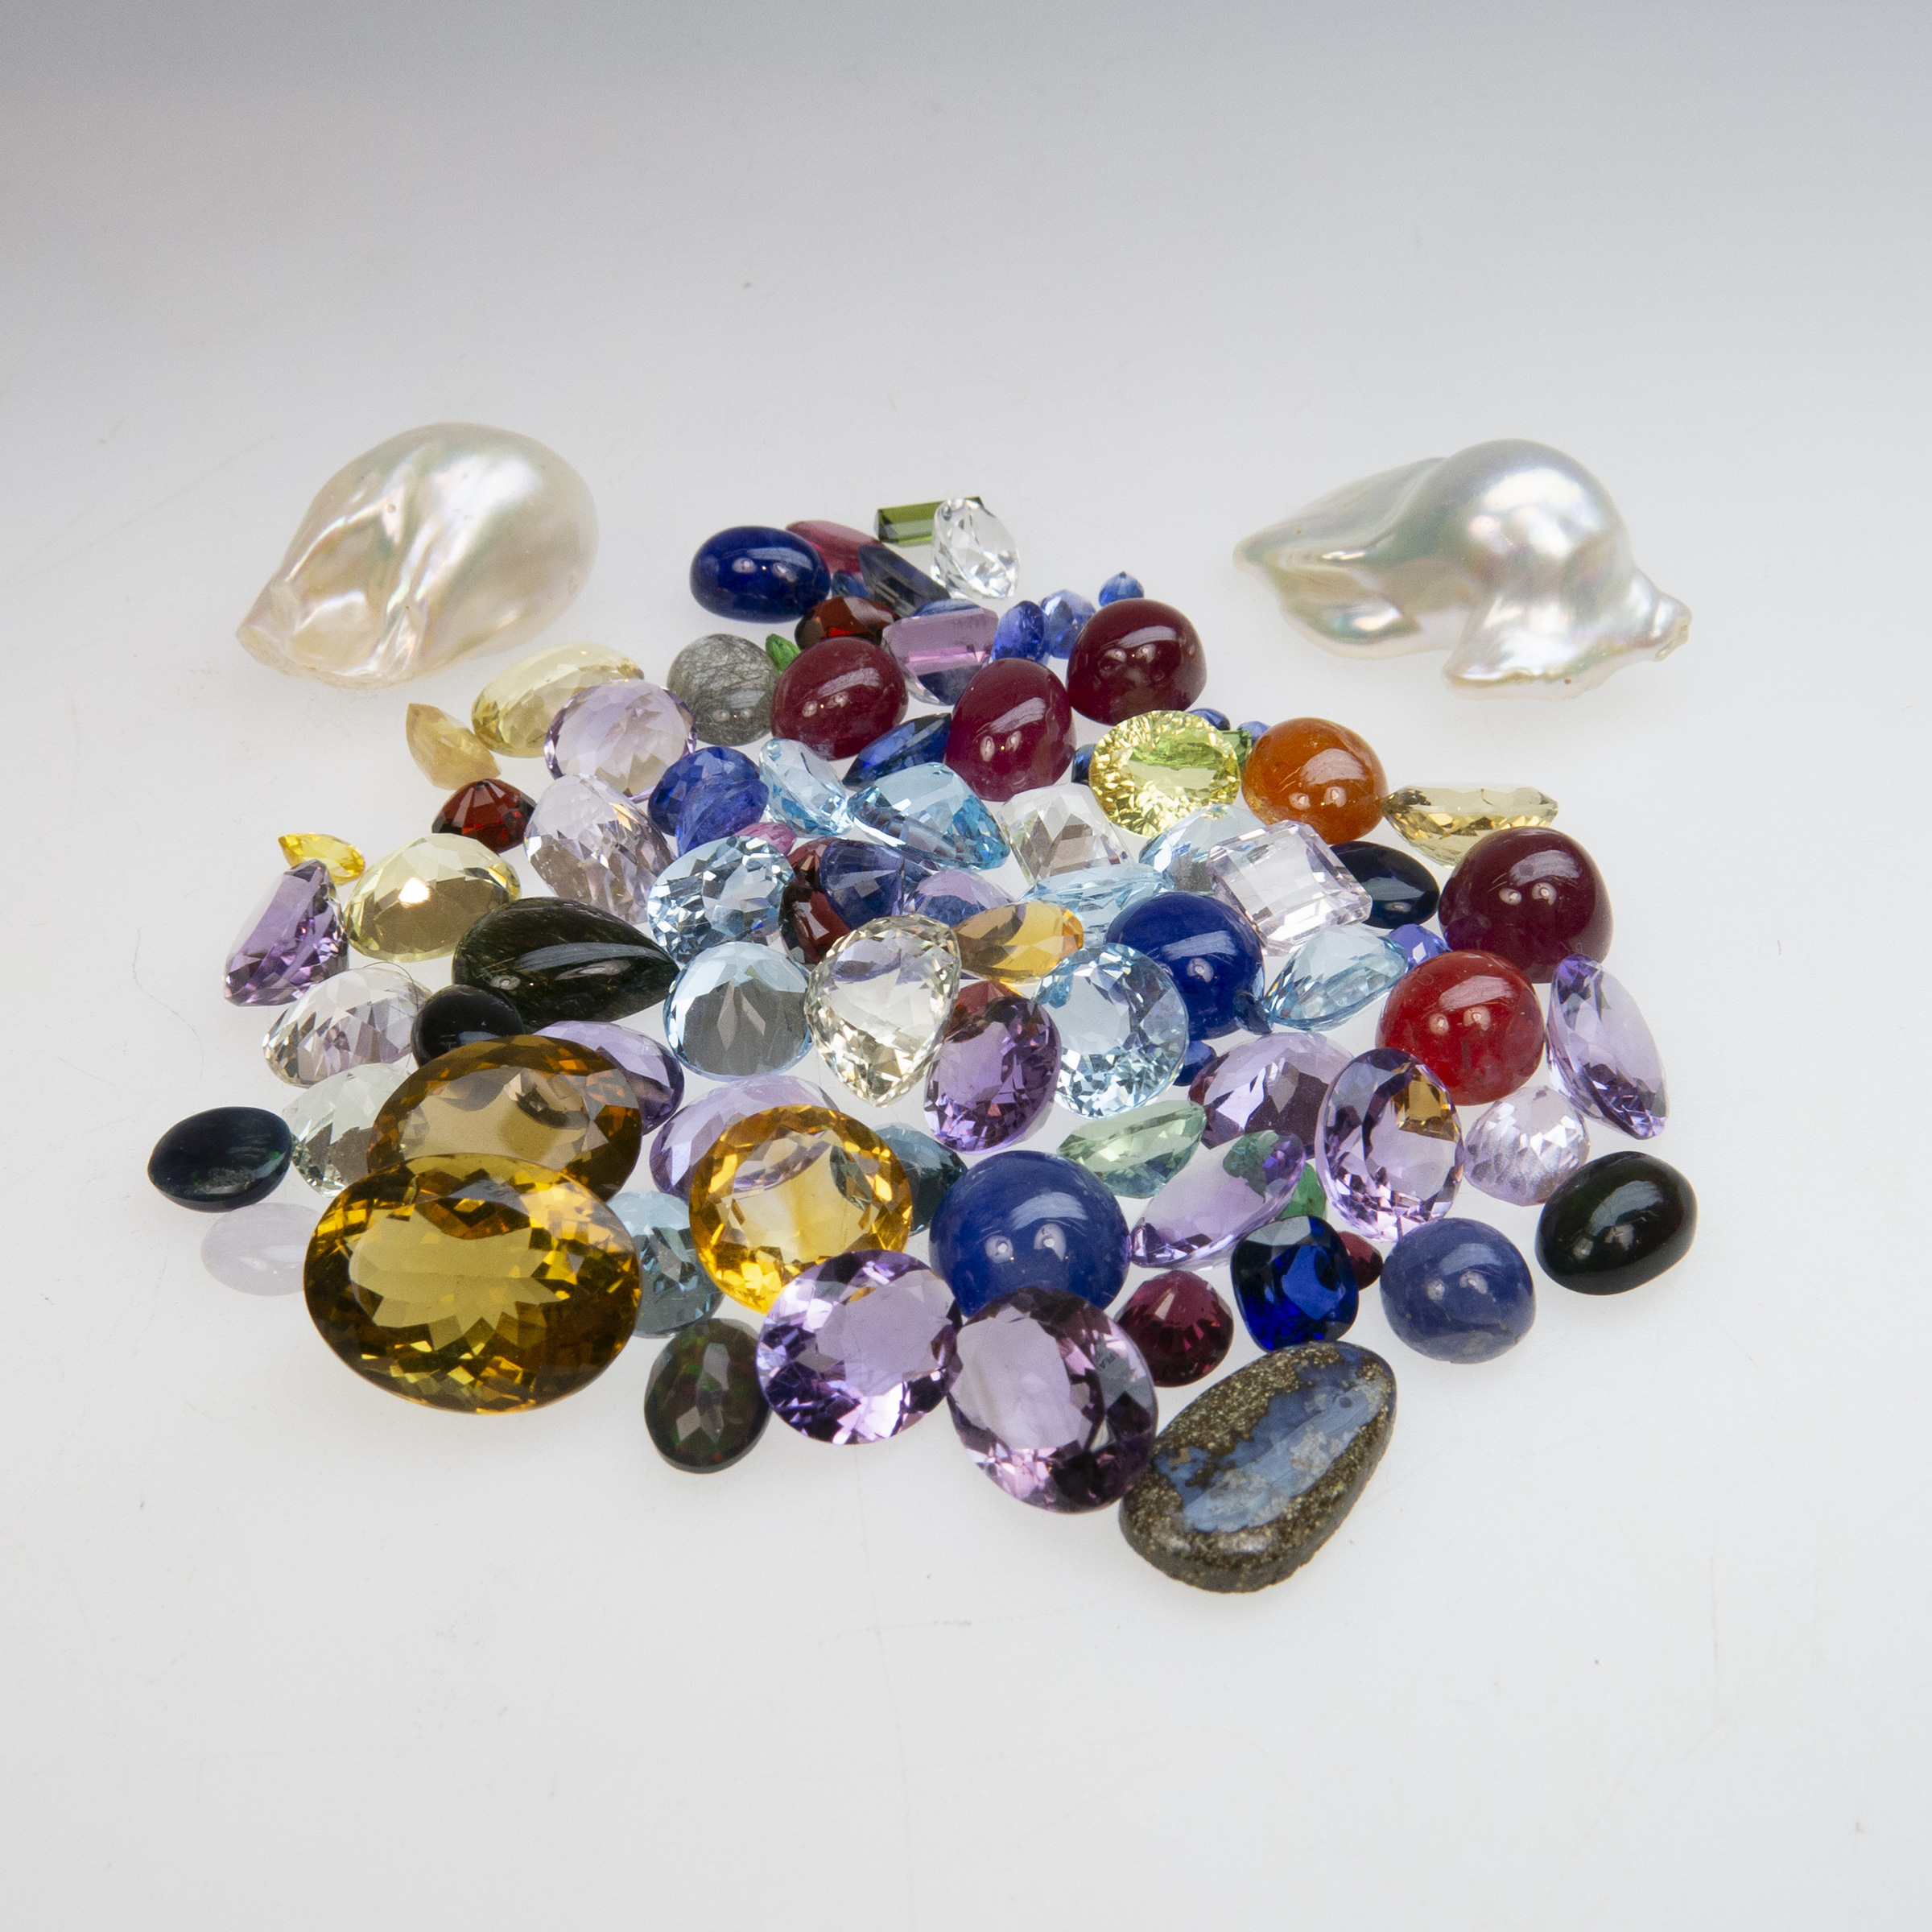 Two Large Baroque Pearls And A Quantity Of Various Unmounted Gemstones